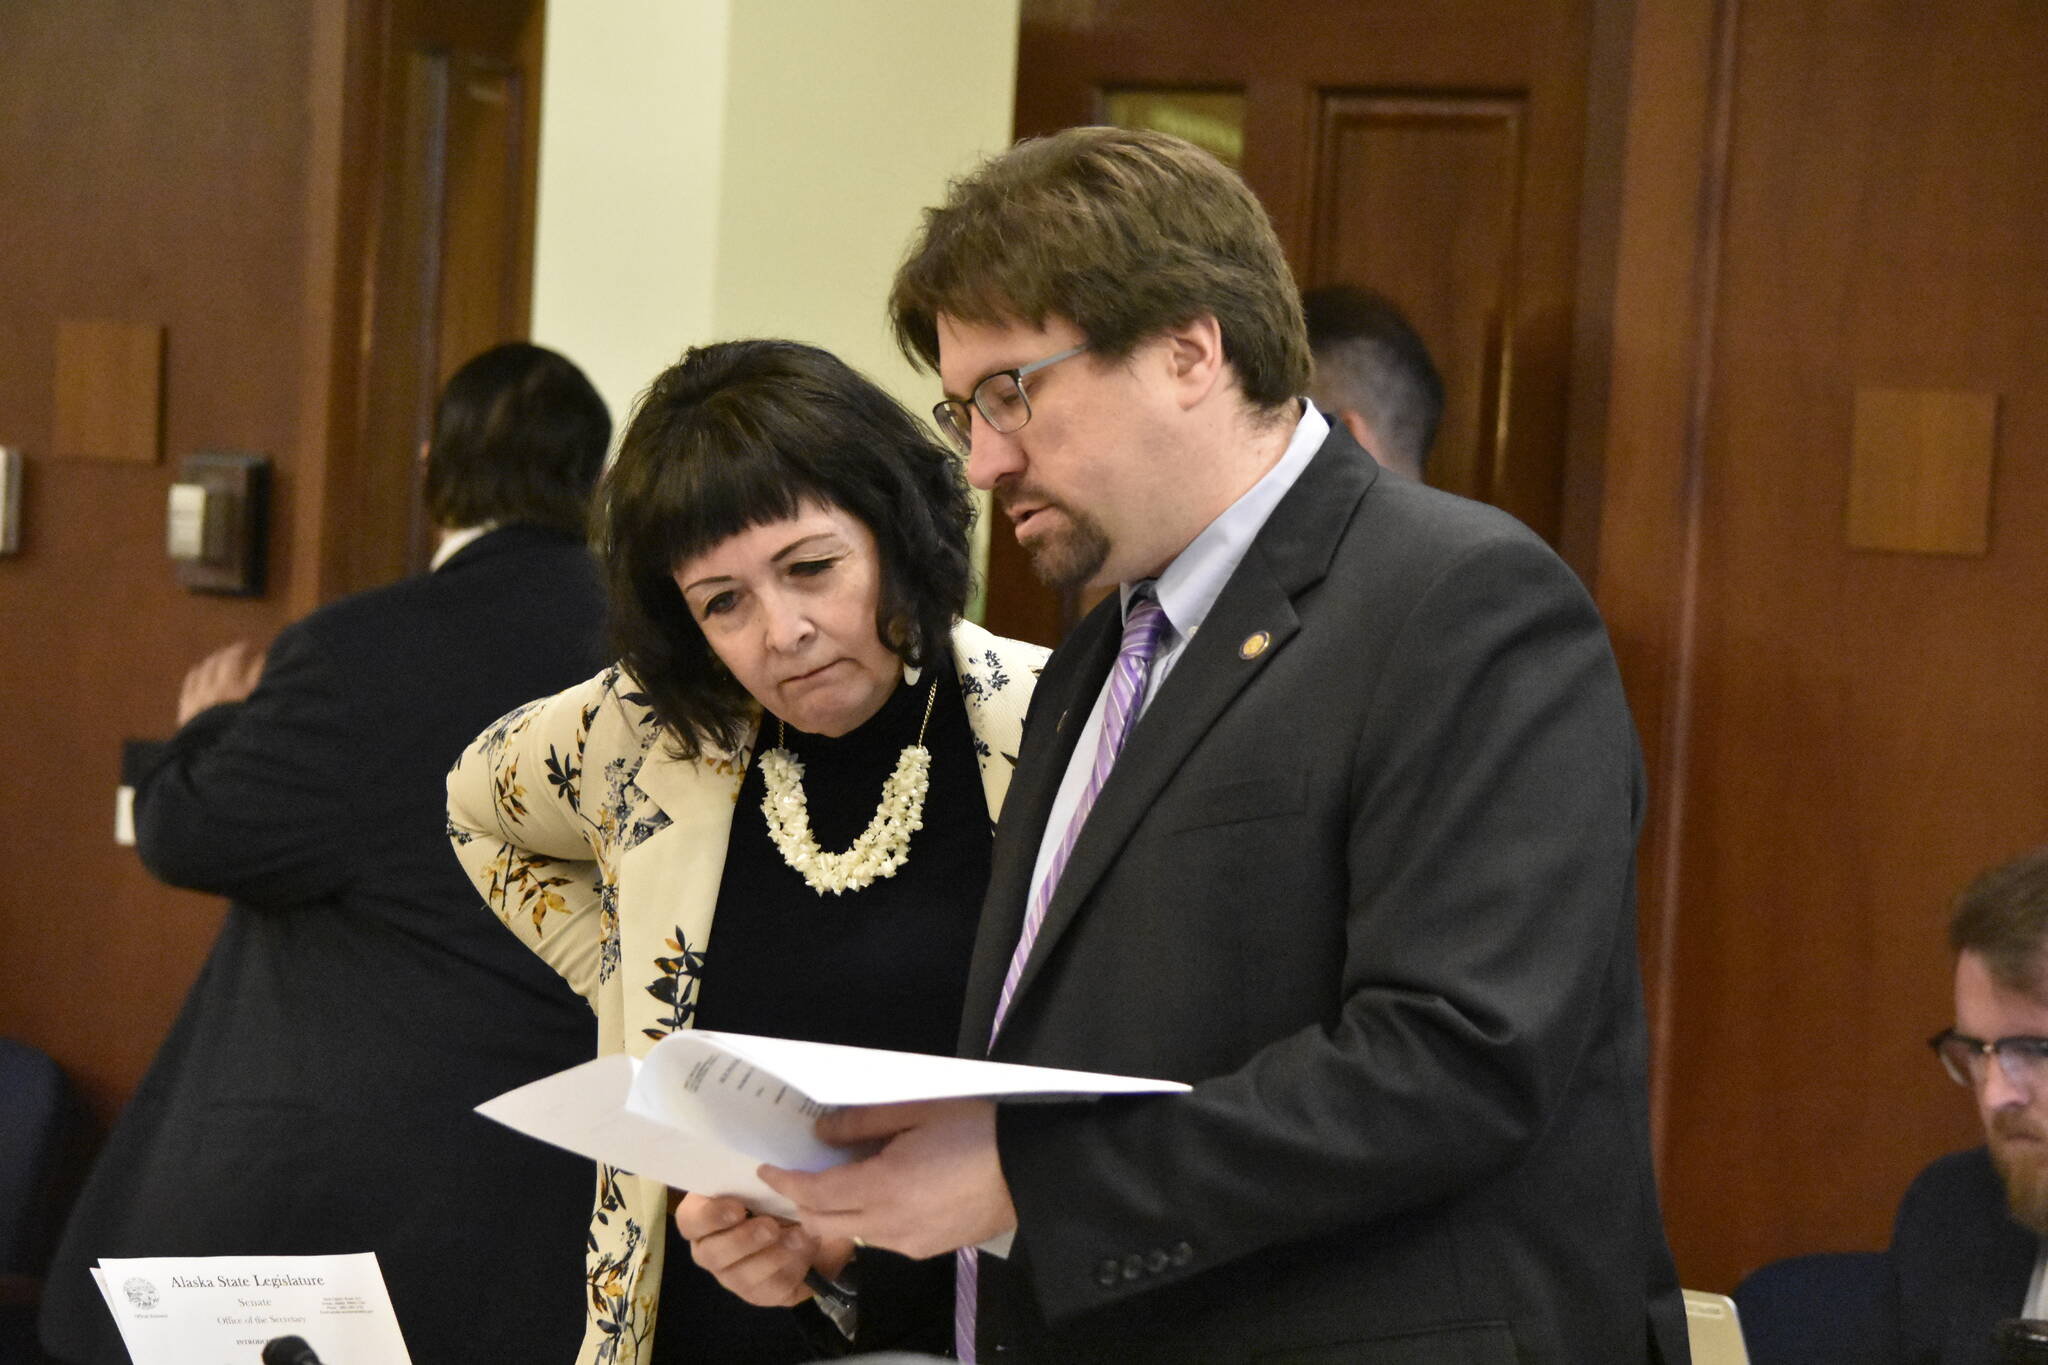 Sens. Shelley Hughes, R-Palmer, left, and Robert Myers, R-North Pole, read through one of 41 amendments submitted to the state’s omnibus budget bill being debated on the floor of the Alaska State Senate. (Peter Segall / Juneau Empire)